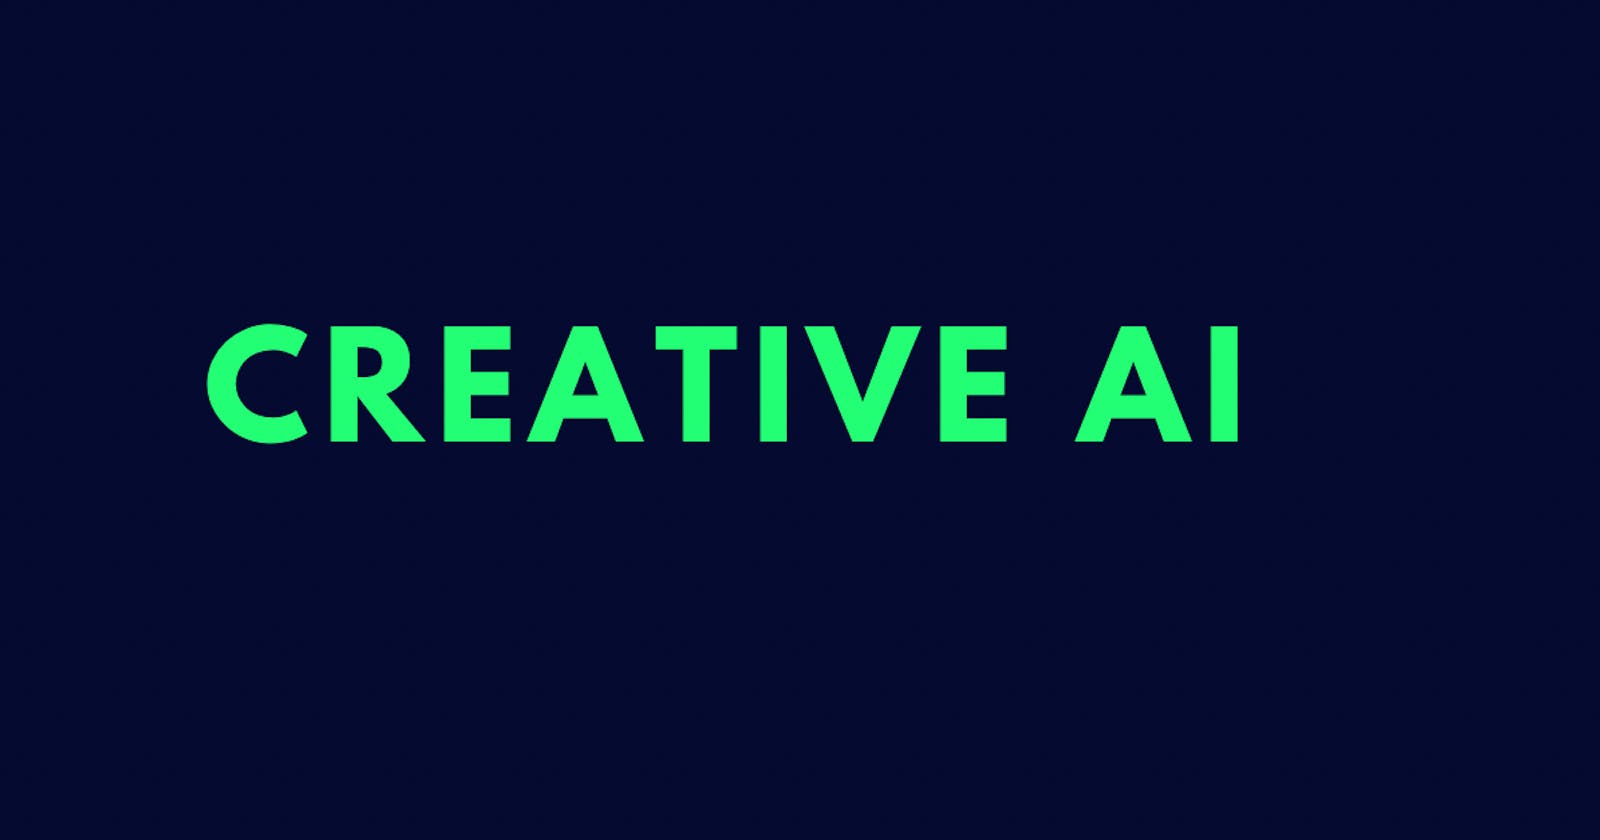 Creative AI: Introducing an Innovative Application: Content Generation, Answering Questions, and Illustration and Drawing through Text Input